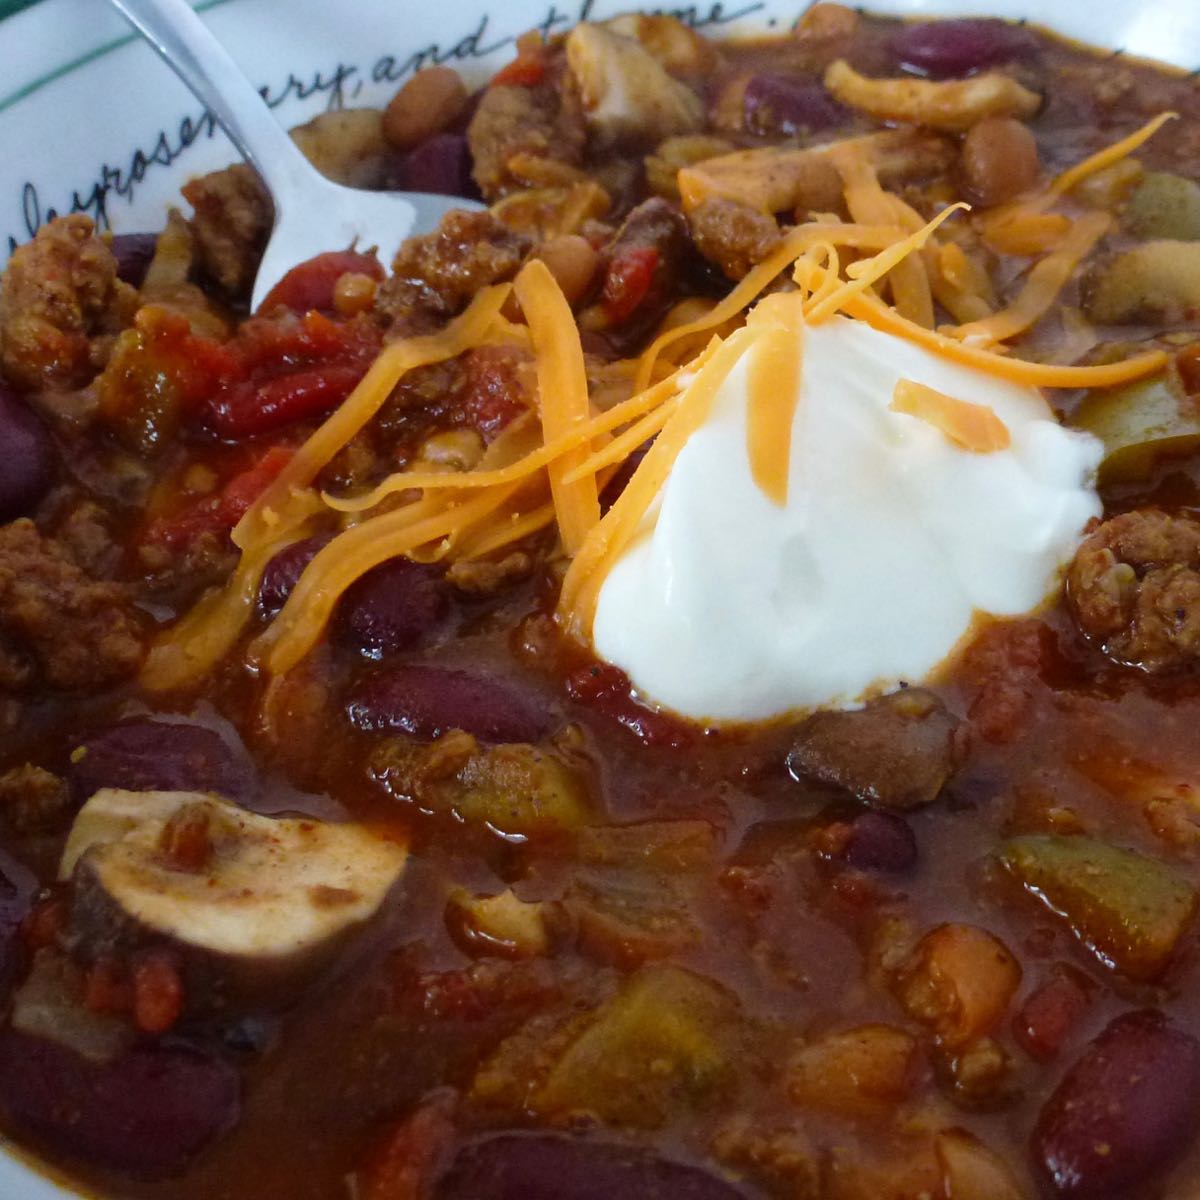 A bowl of Homemade Chili topped with sour cream and sprinkled with shredded cheddar cheese.